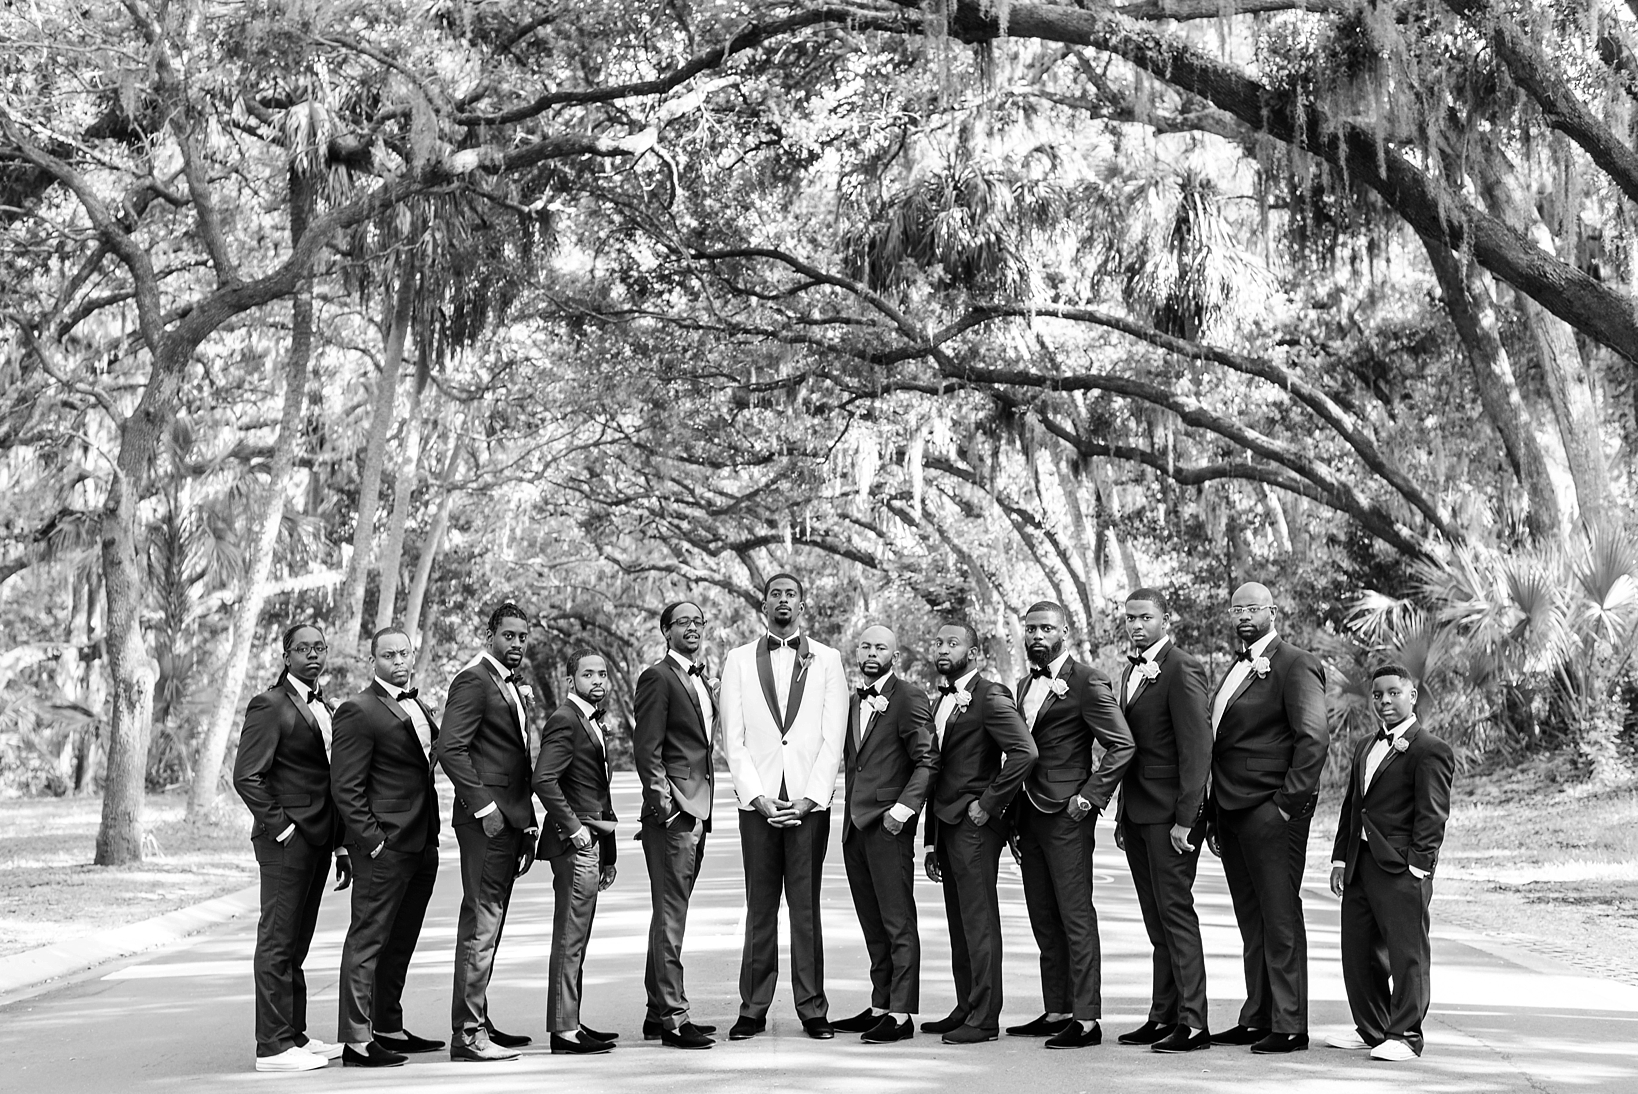 The Groom and his Groomsmen in a timeless black and white image